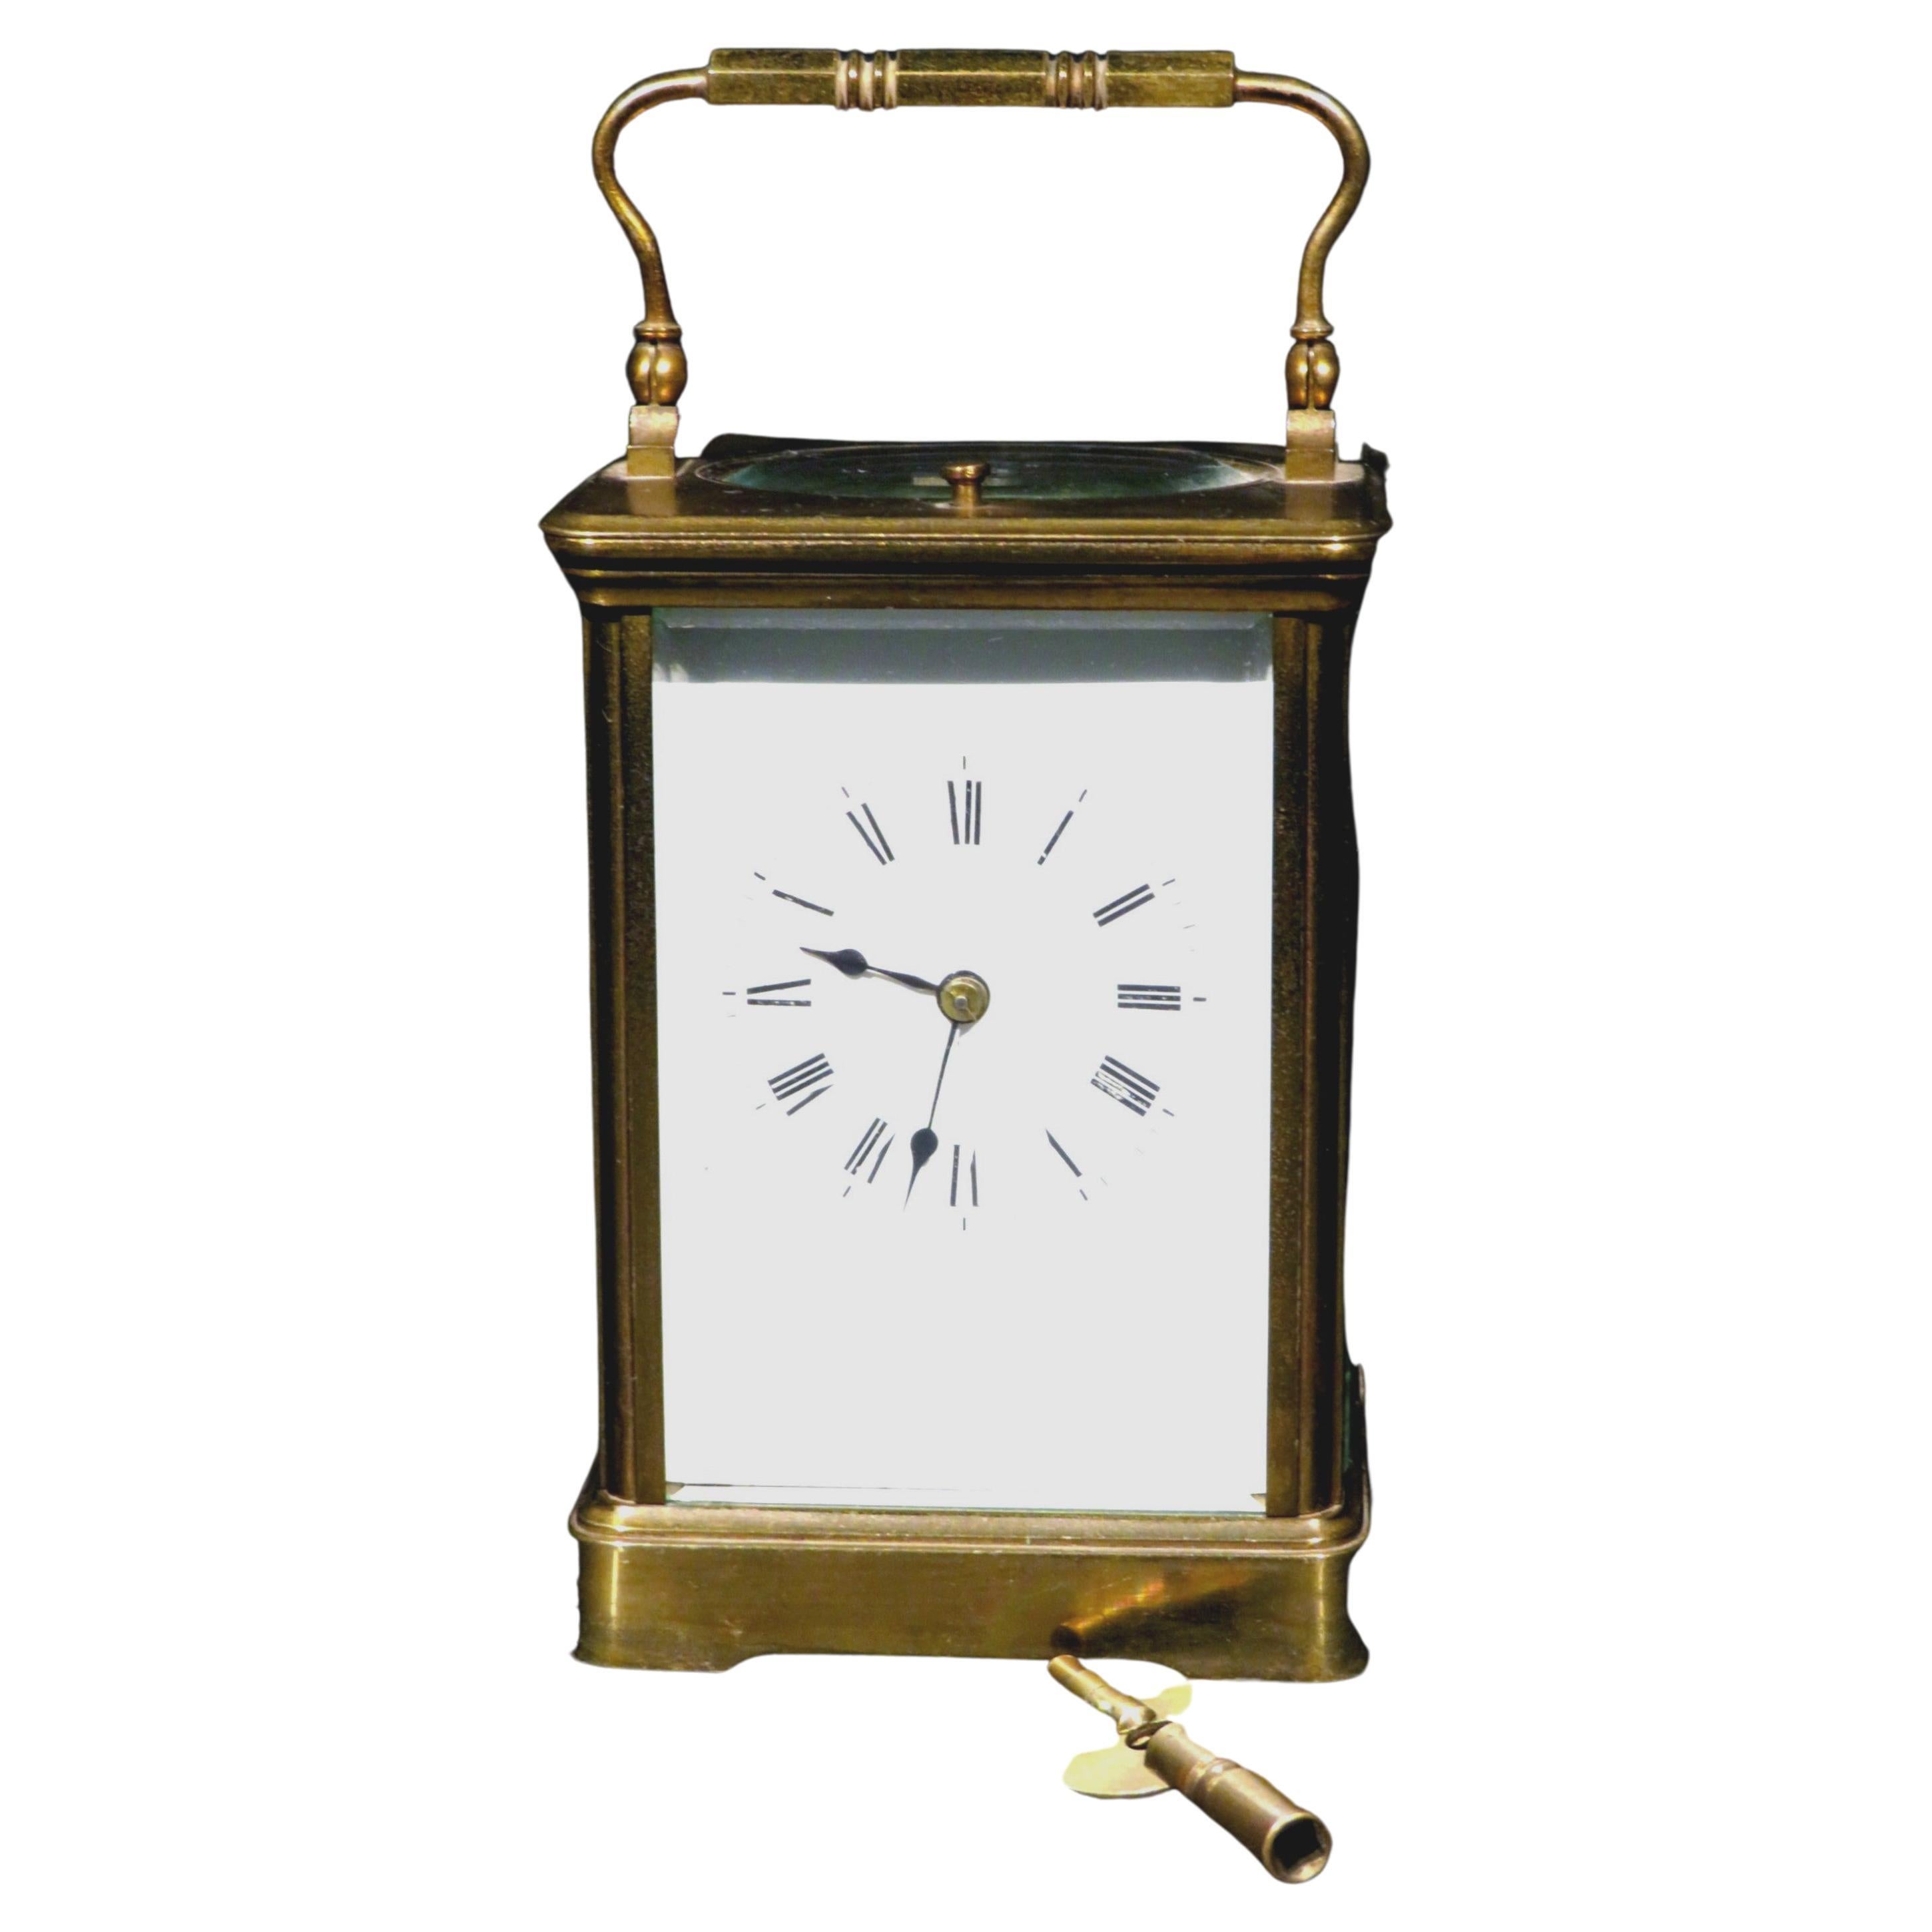 A Very Good 19th Century Repeating Carriage Clock, France Circa 1890